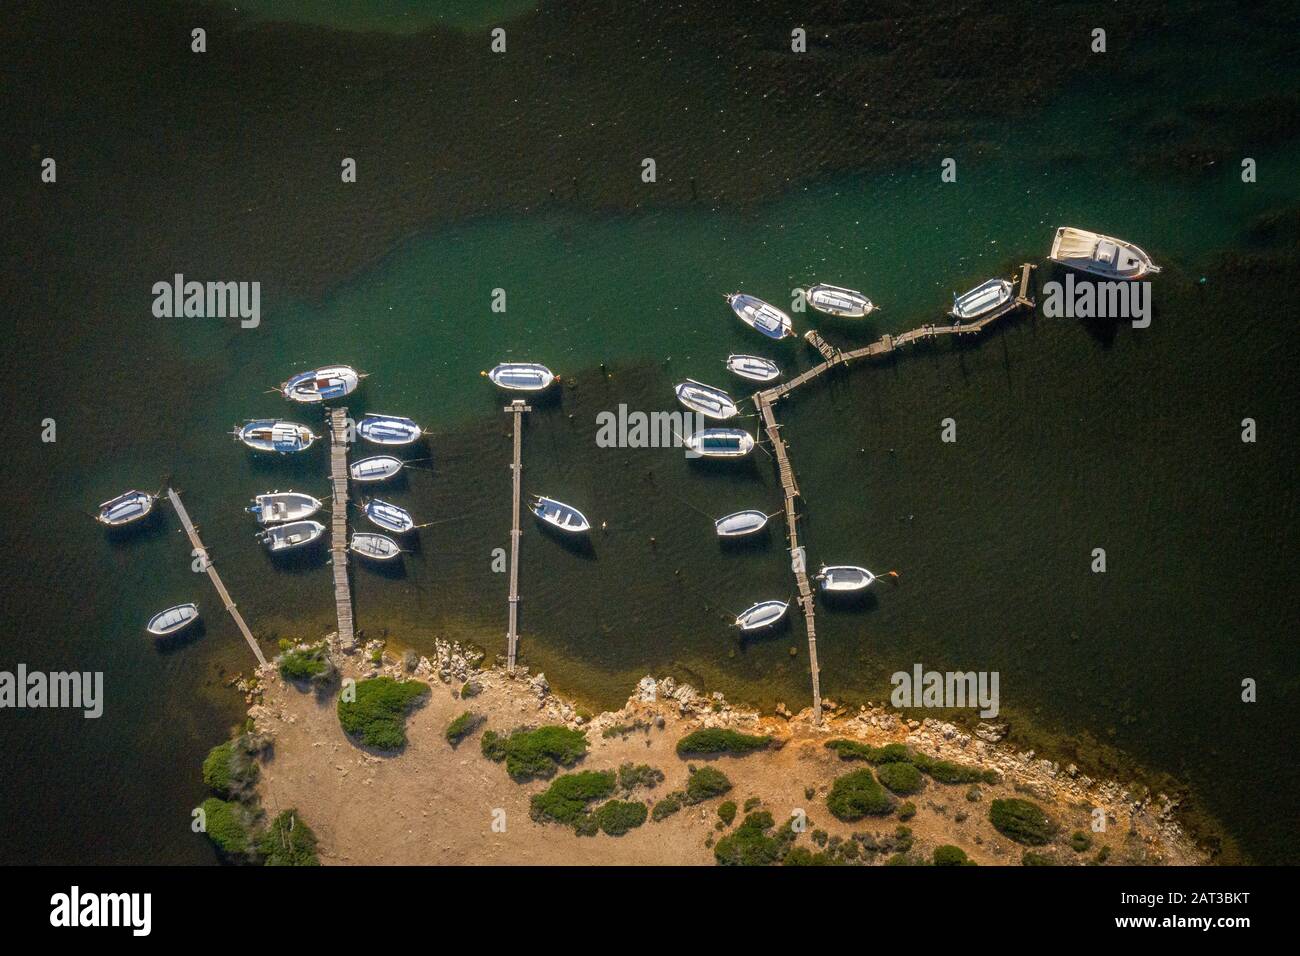 Moored spanish fishing boats from above Stock Photo